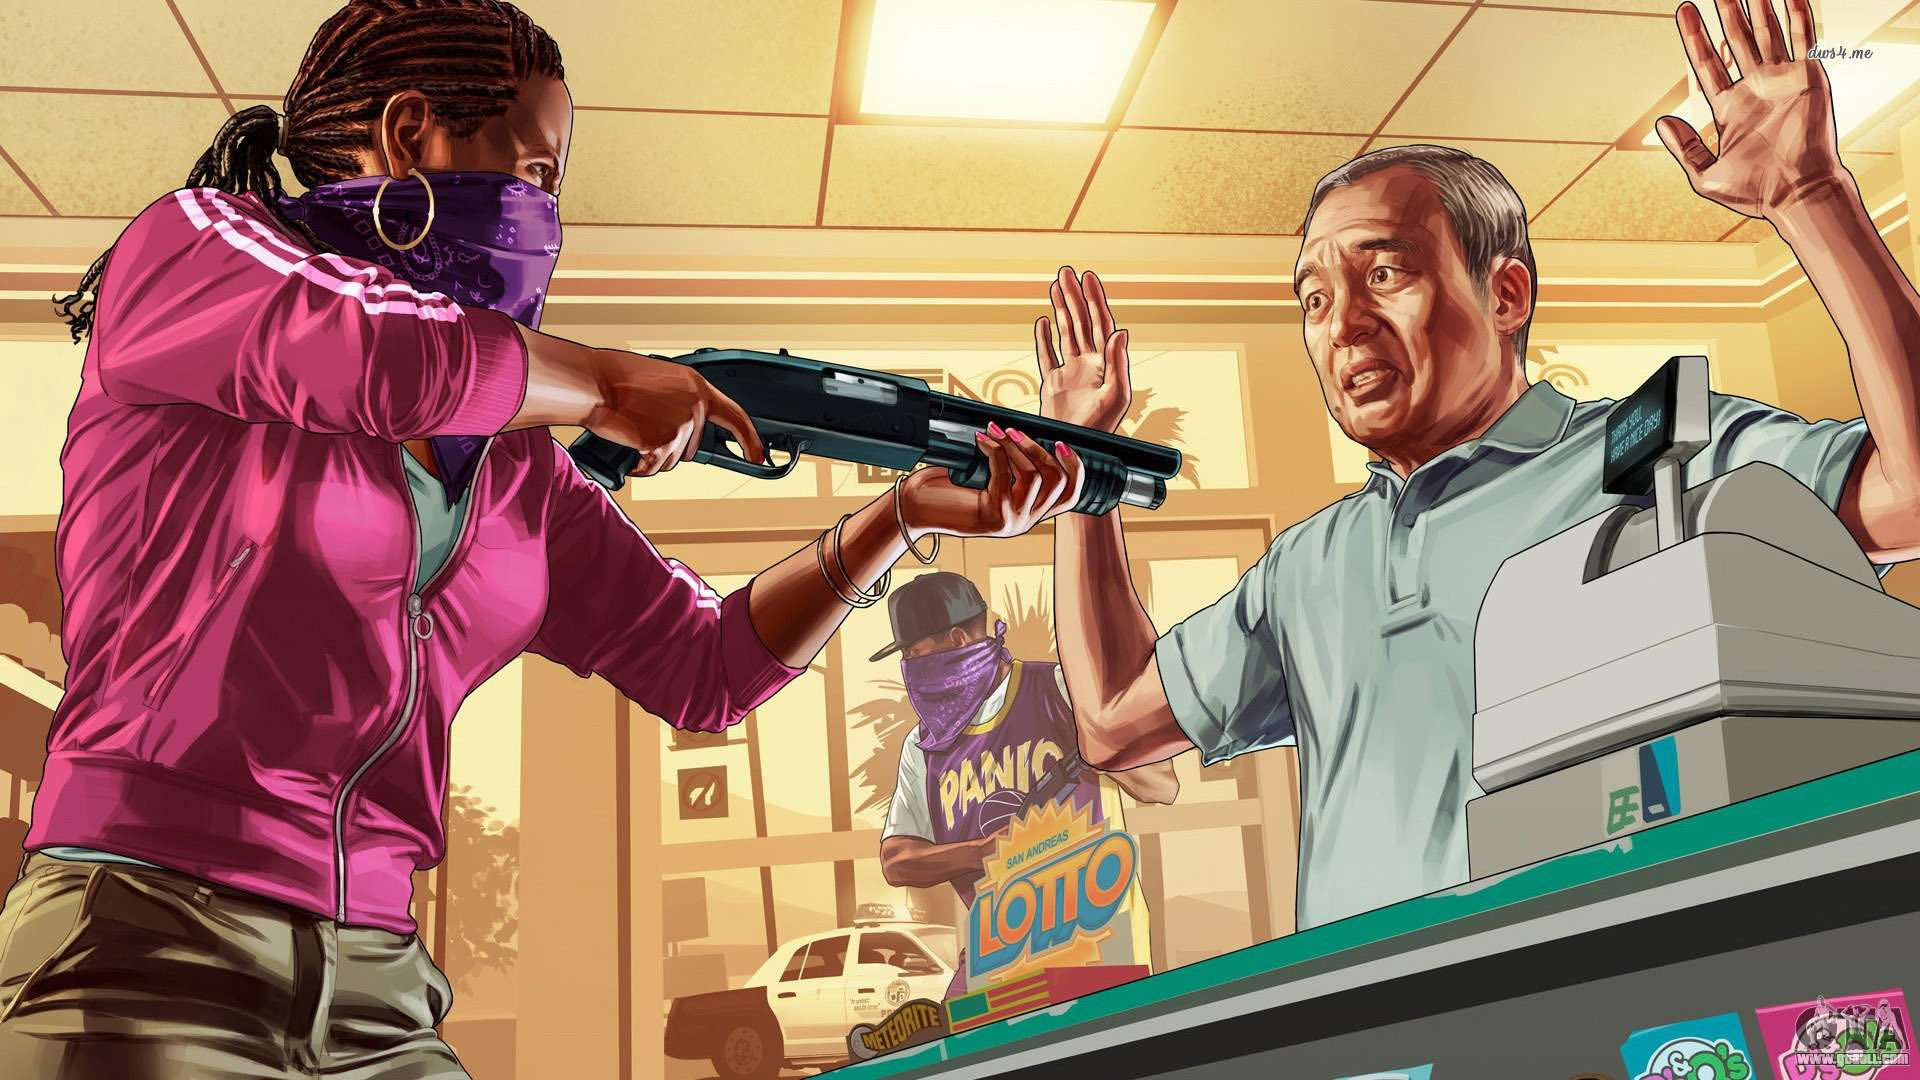 Grand Theft Auto VI gets massive leak with early gameplay footage